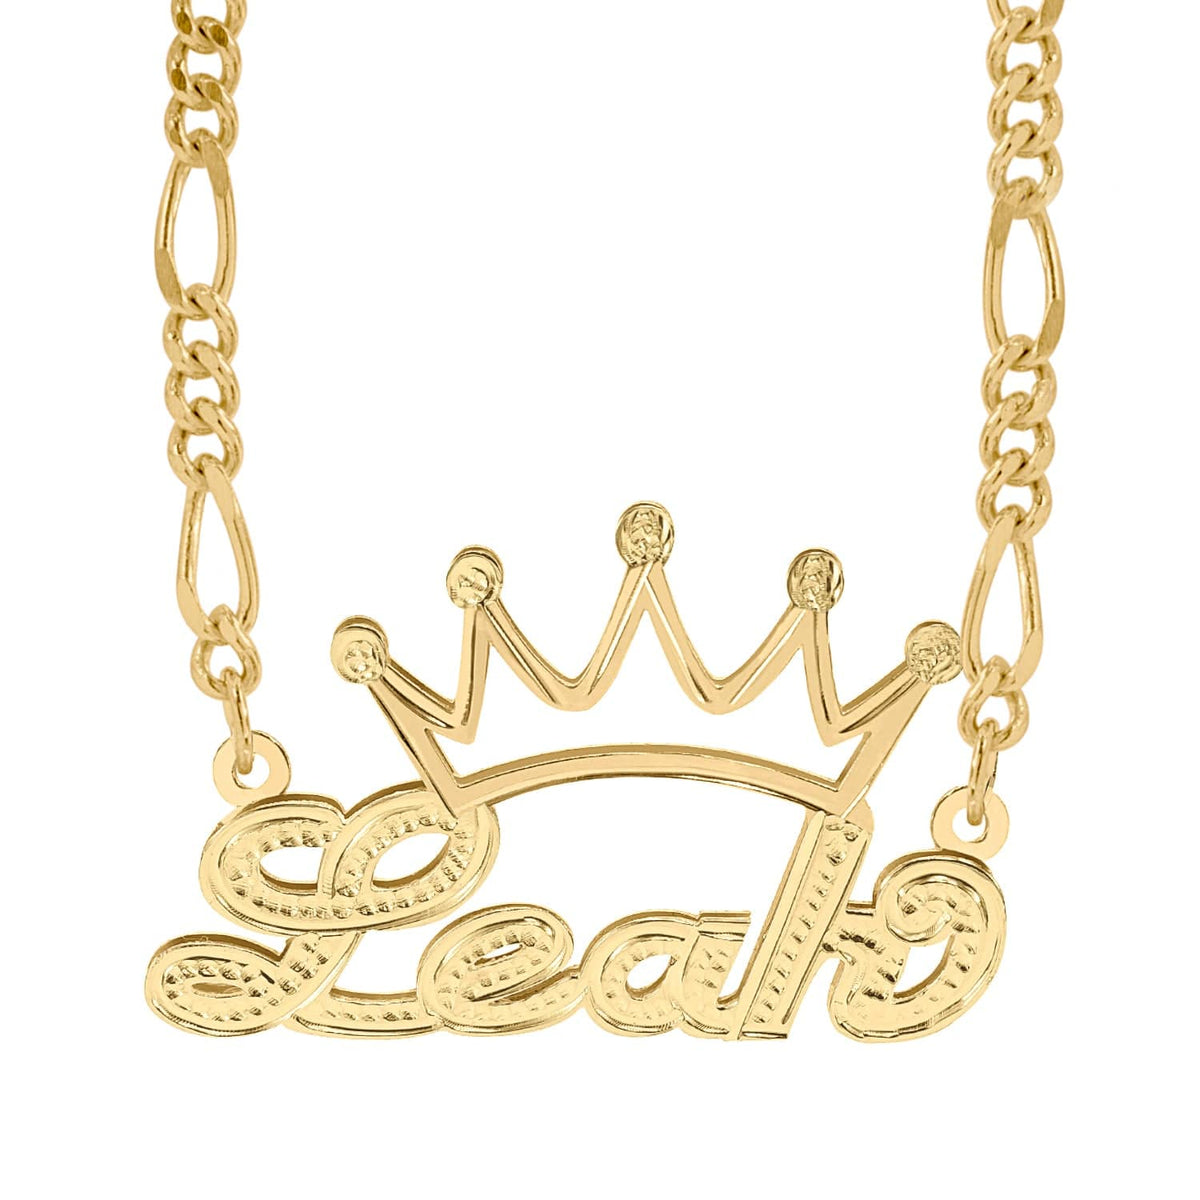 14k Gold over Sterling Silver / Figaro Chain Personalized Double Nameplate Necklace w/ Crown